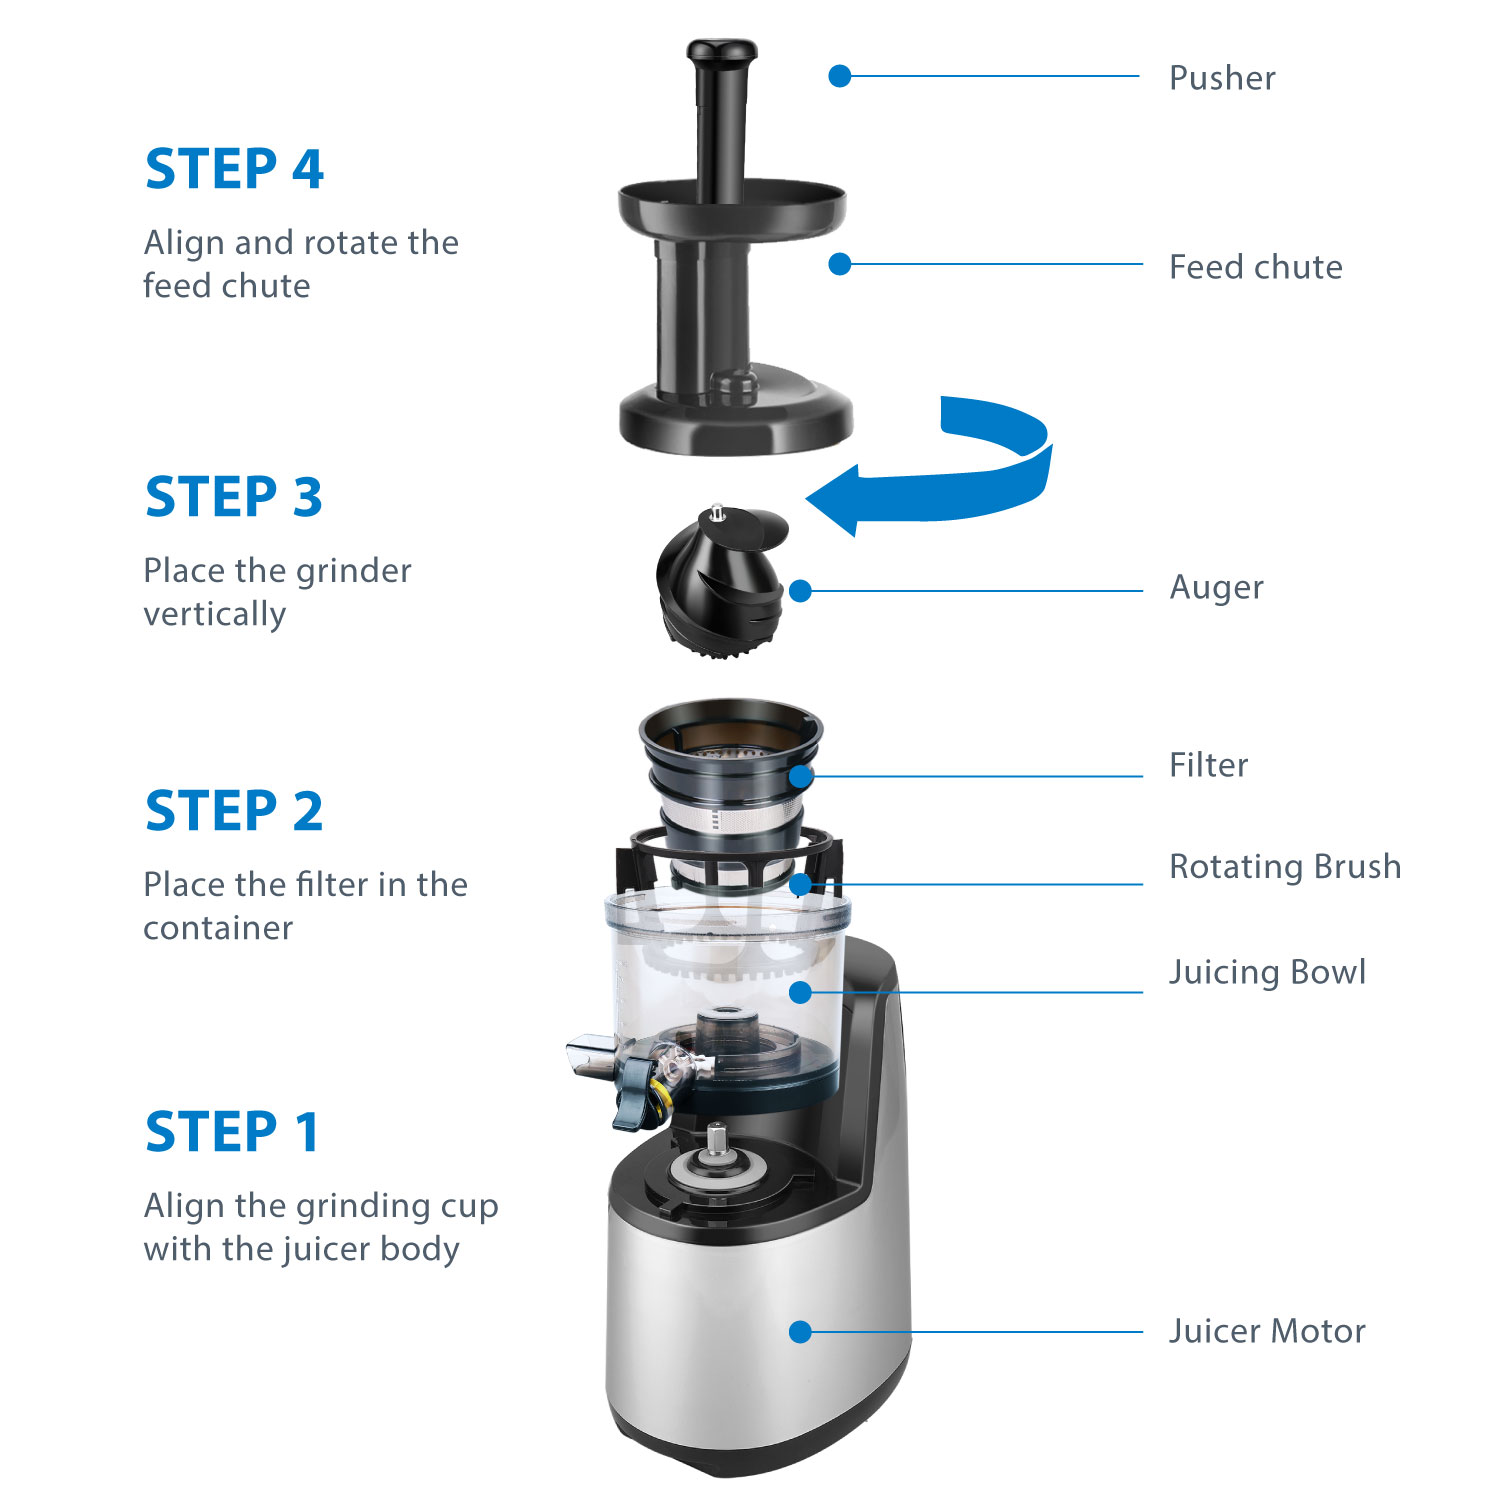 The juice tap / cap can be fixed onto the juice outlet to contorl the flow of juice to the juice pitcher. Close the juice tap valve to pre-mix your juice, if desired. Closing the cap and adding water to the auger housing helps to pre-rinse the juicing screen for easier clean up; It is detachable for easy cleaning by simply pour water through between juices